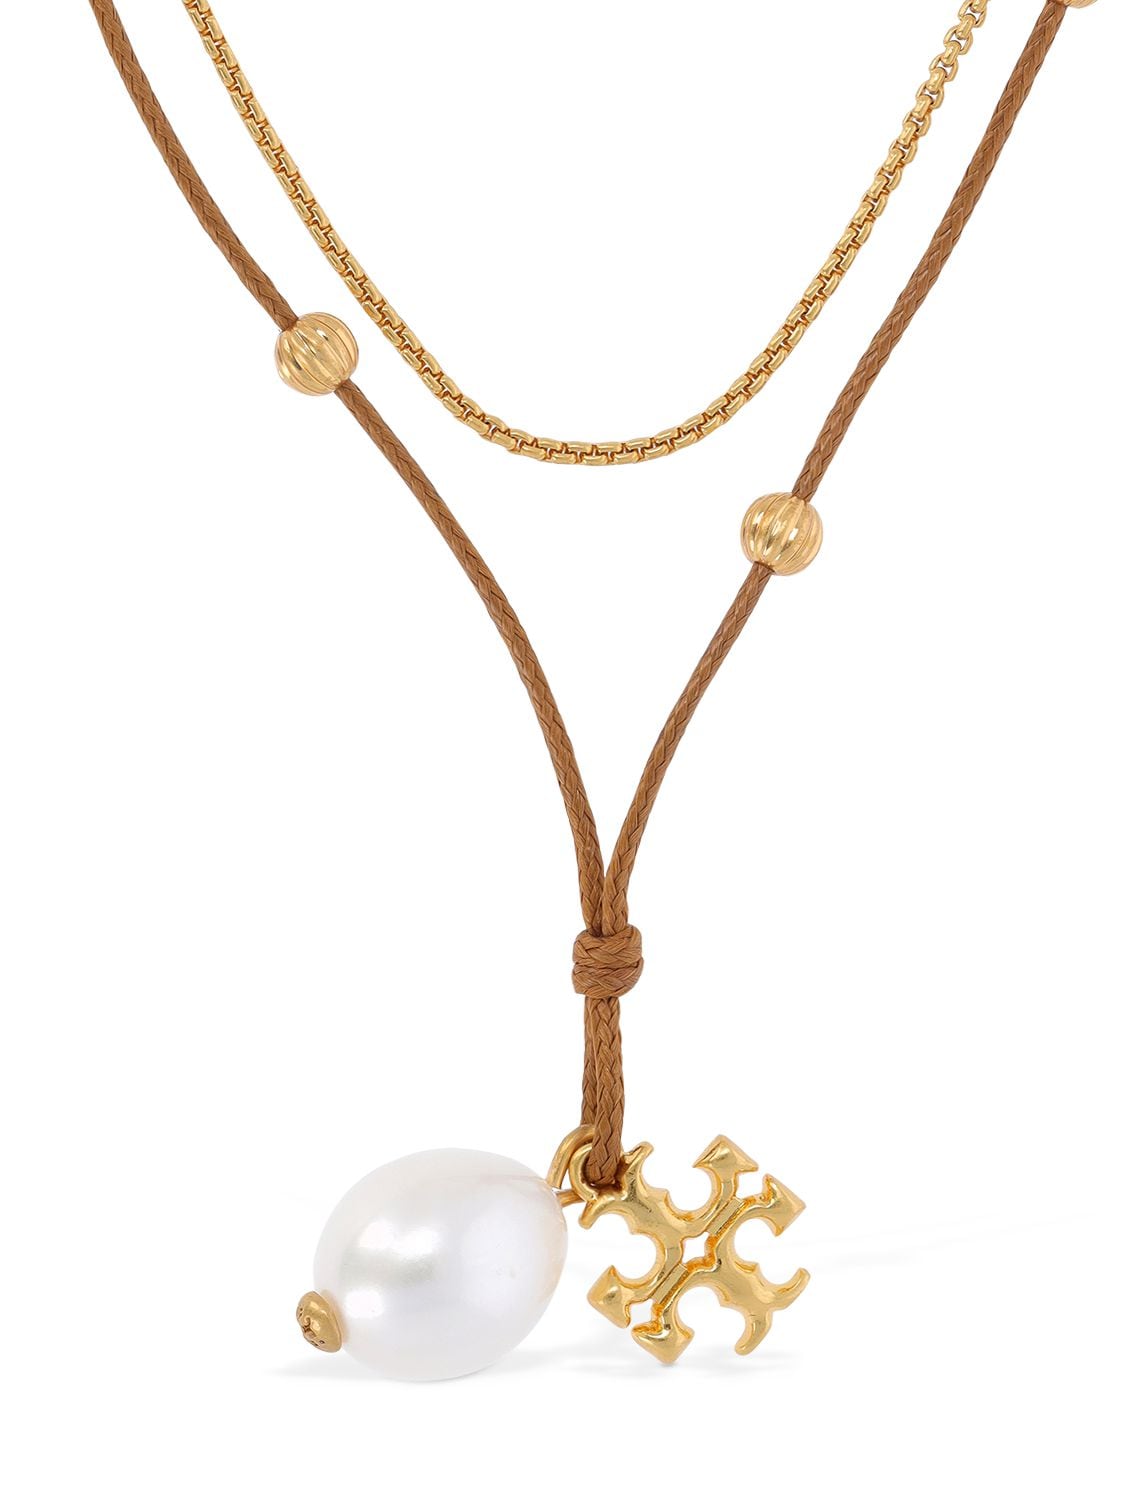 Tory Burch Kira Delicate Layered Freshwater Pearl Gold Tone Pendant Necklace - Gold/Ivory